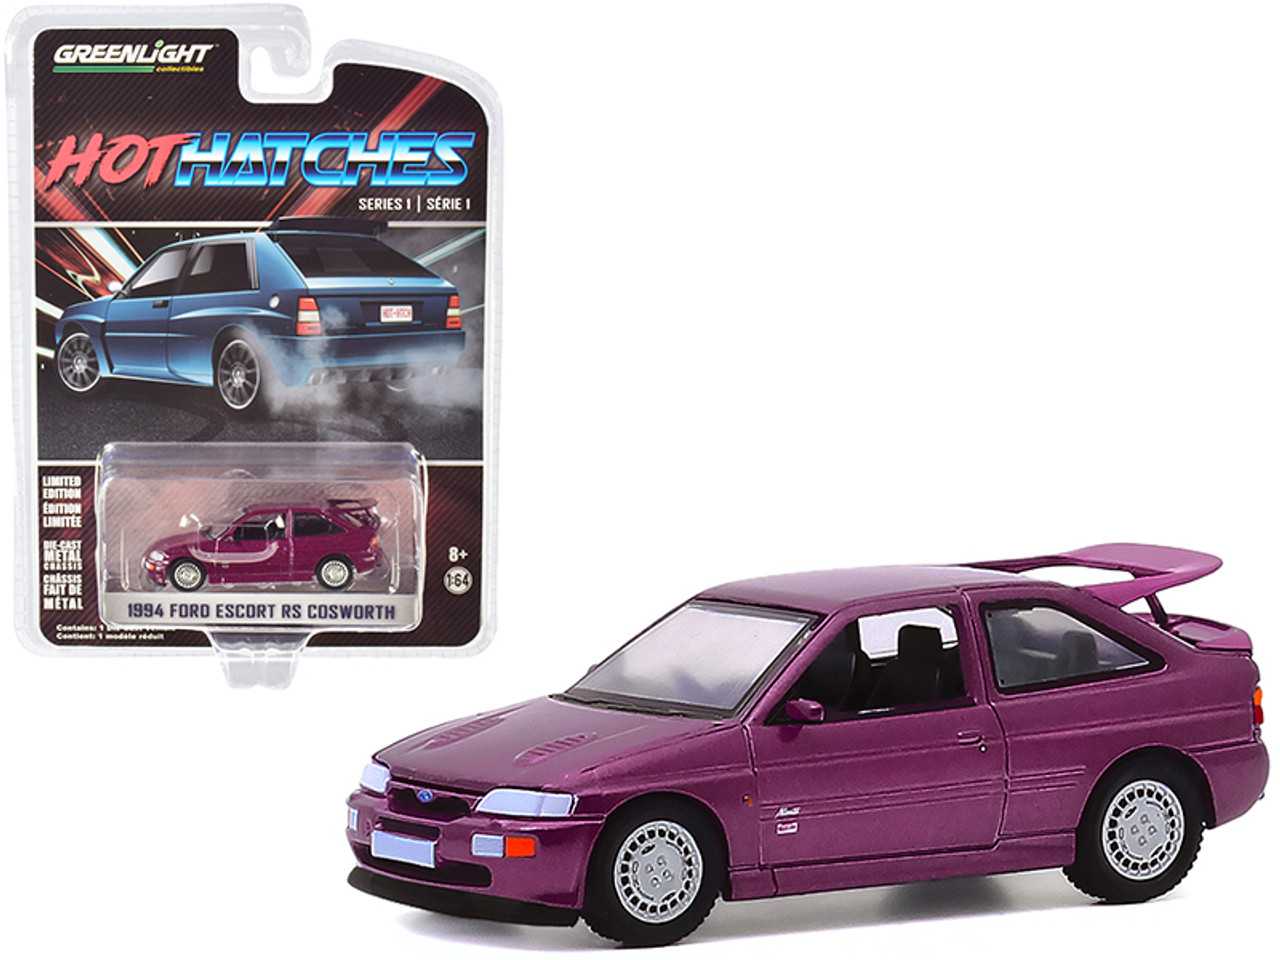 1994 Ford Escort RS Cosworth Monte Carlo Special Edition Jewel Violet Metallic "Hot Hatches" Series 1 1/64 Diecast Model Car by Greenlight